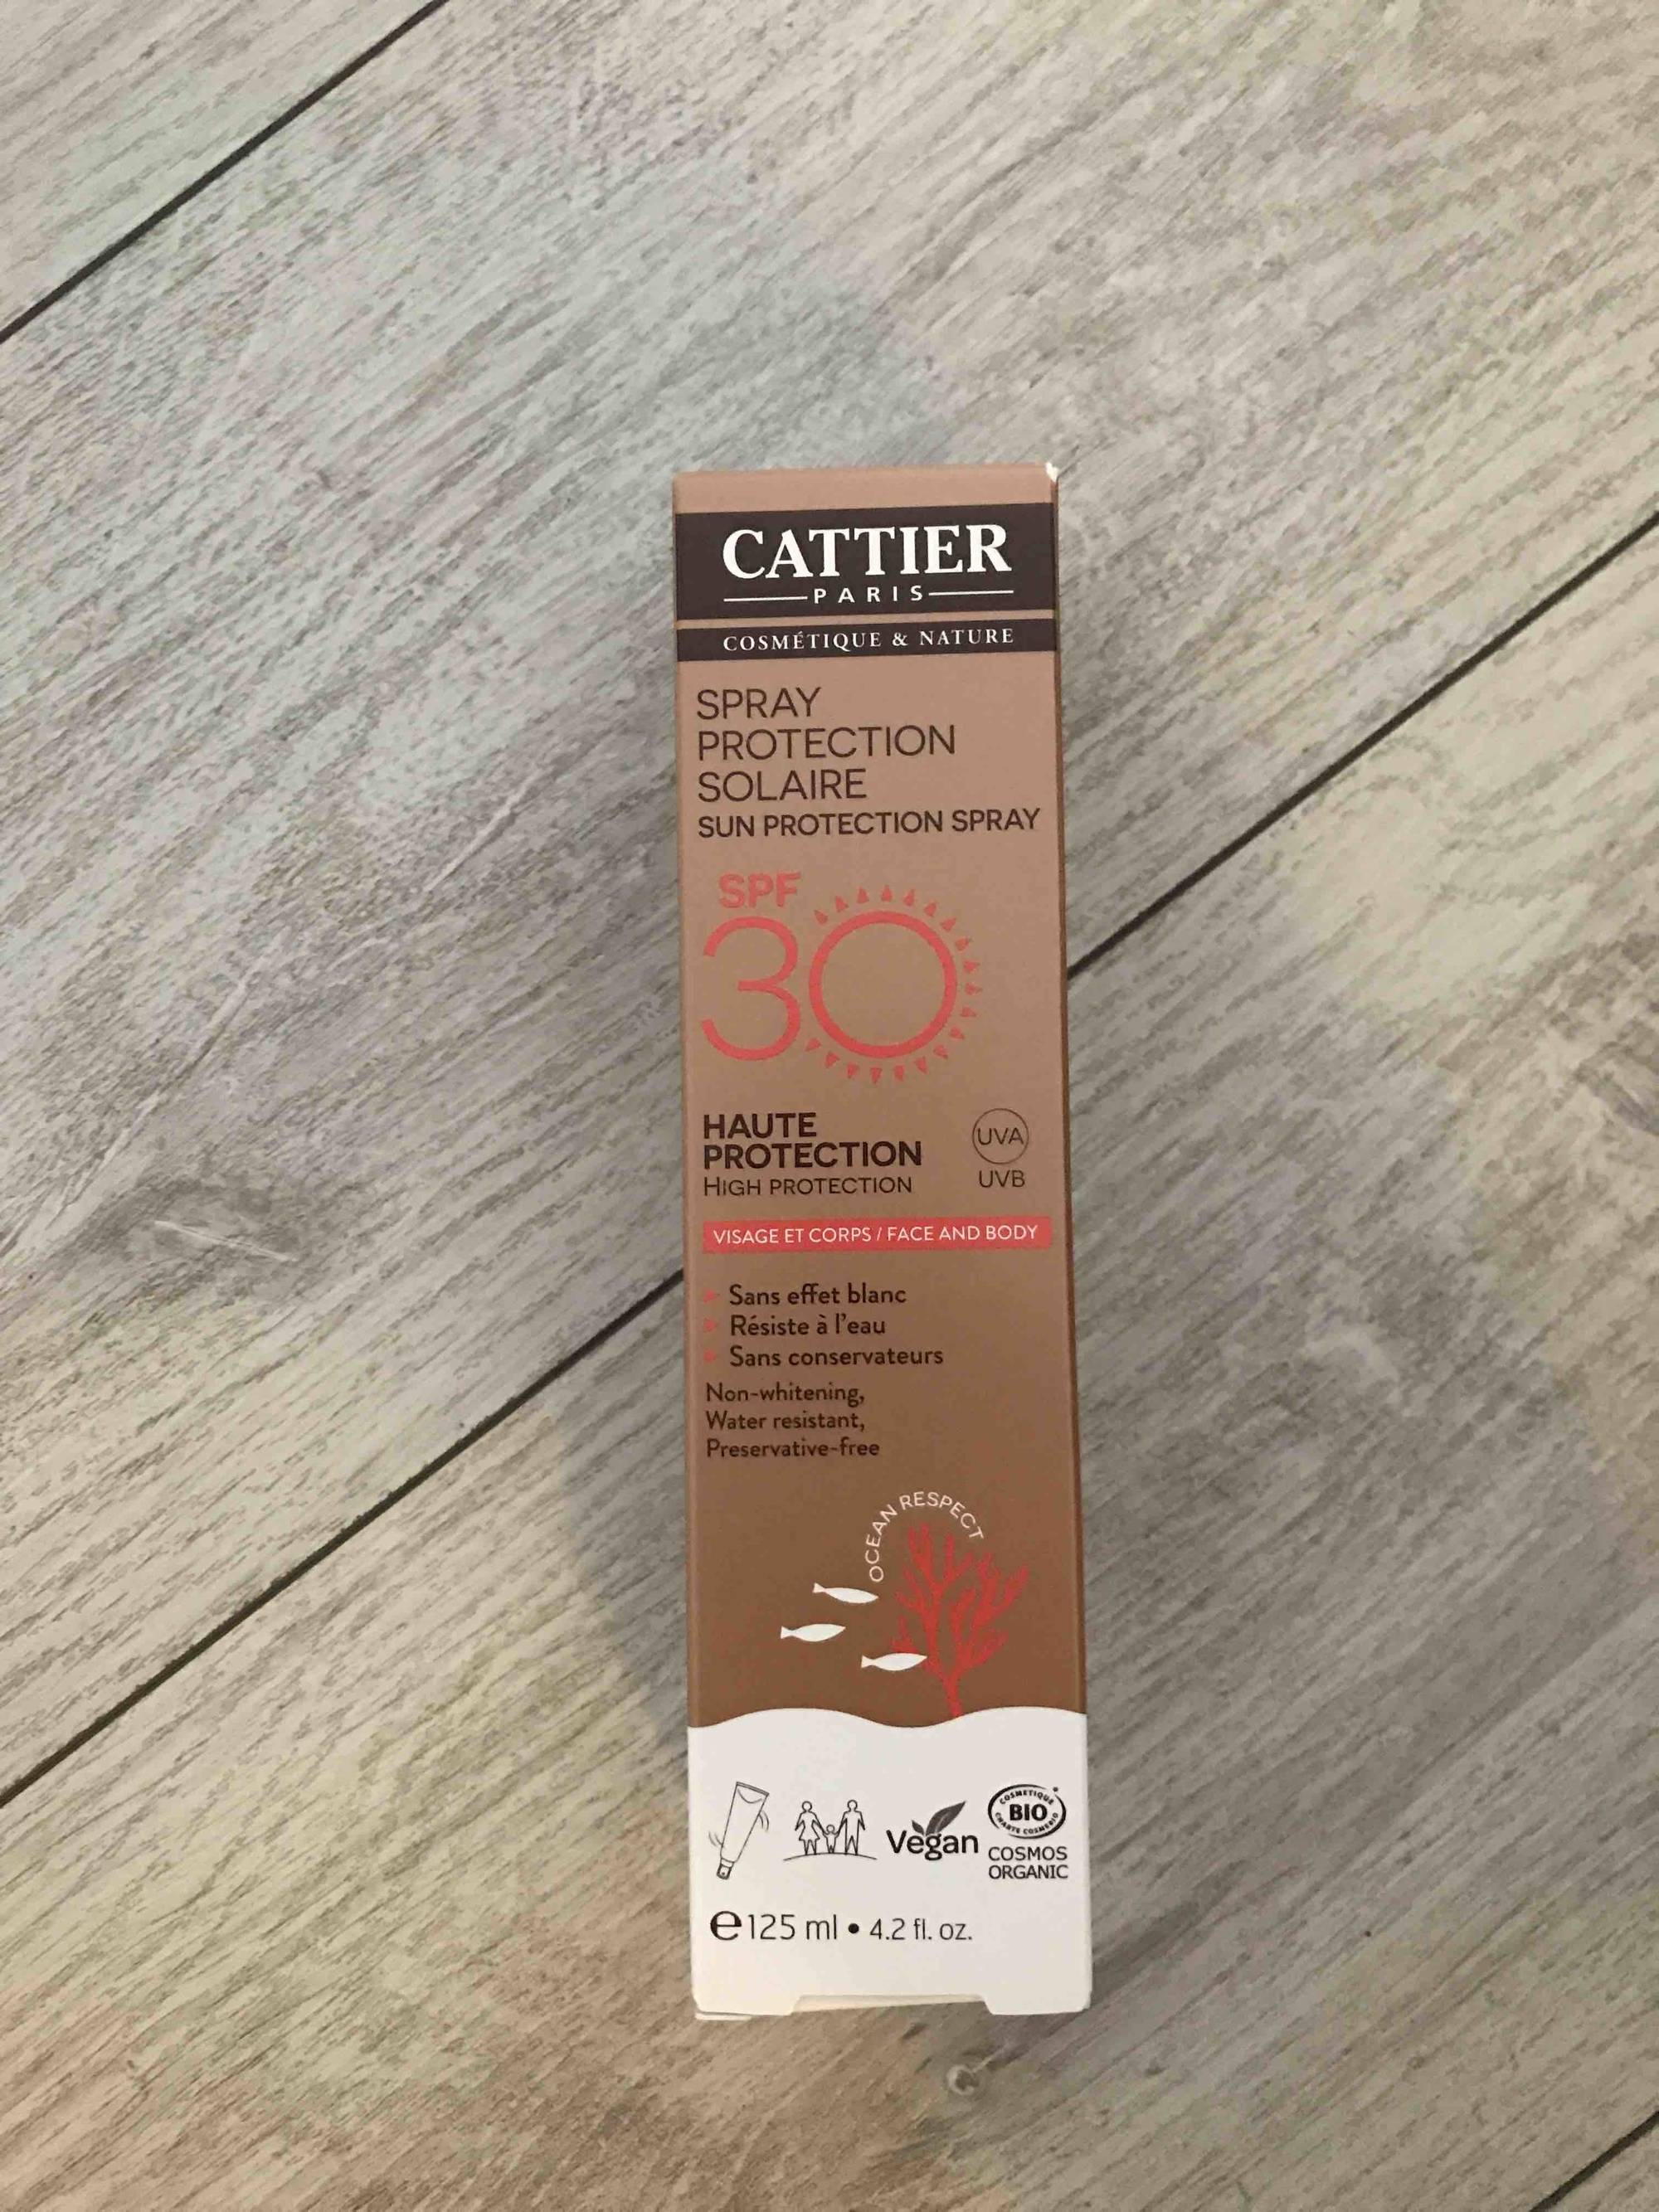 CATTIER - Spray protection solaire SPF 30